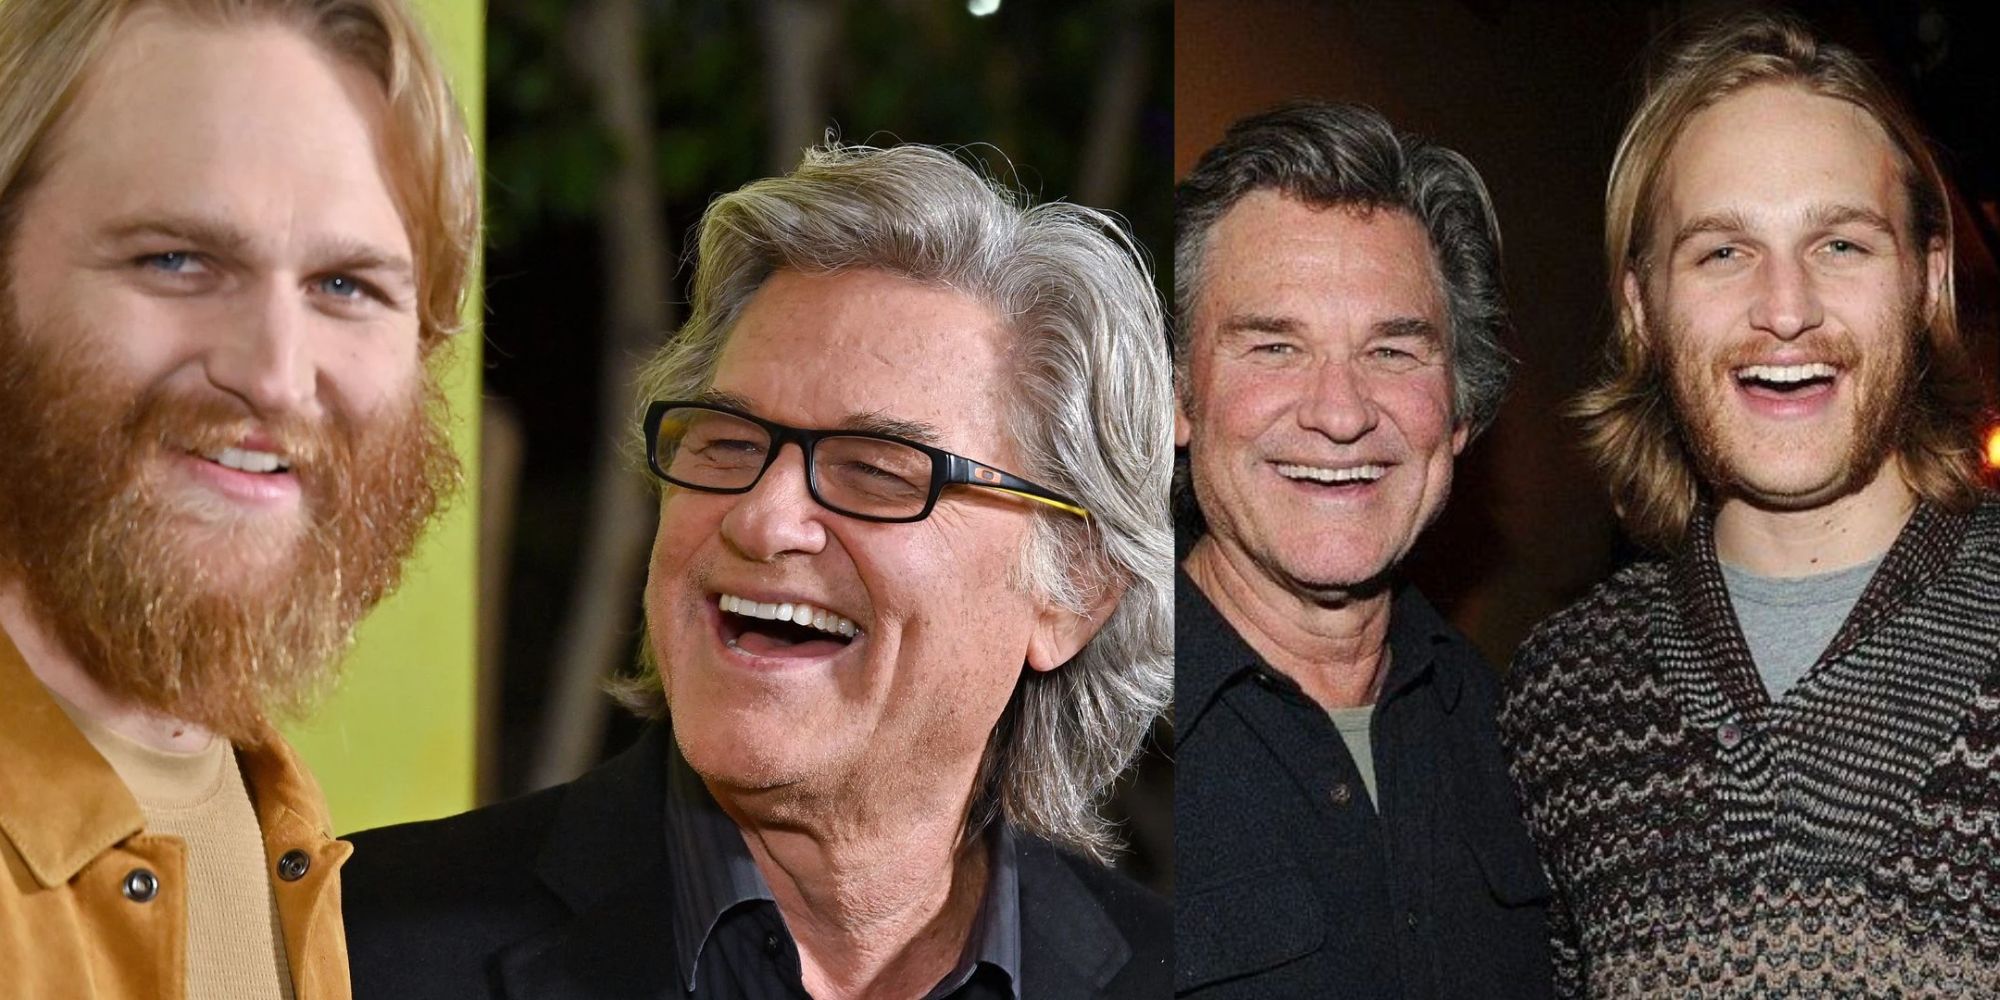 During the Filming of their Show, Kurt Russell's Son Wyatt Had an Encounter with a Bear, Making it an Eventful First Day